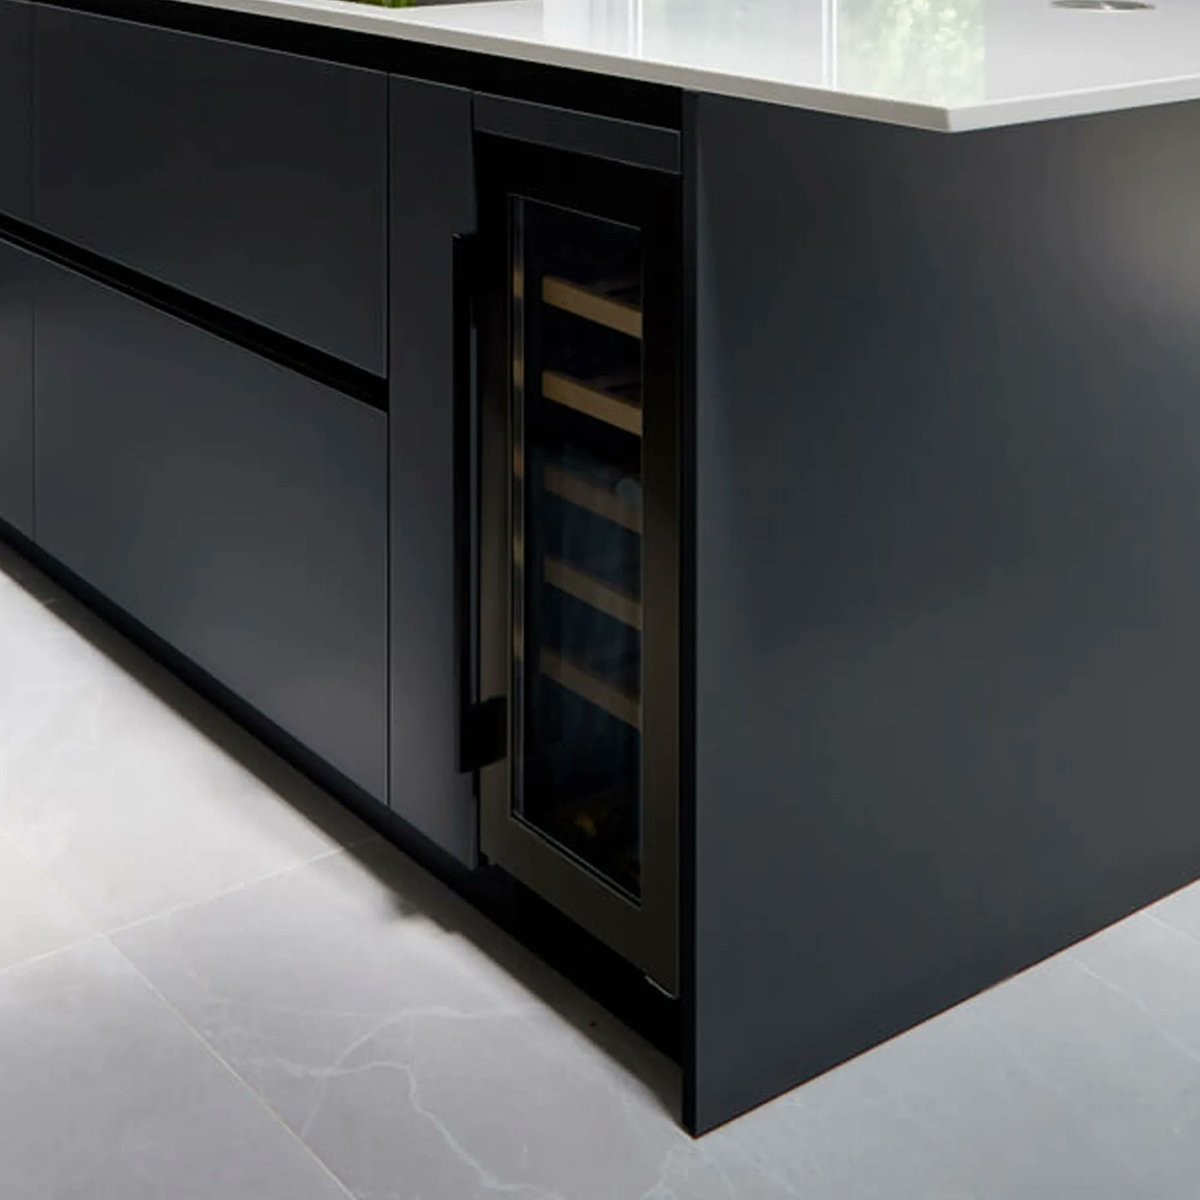 Find out more about how Mioko used our gunmetal wine cabinet in one of her latest kitchen designs, by reading the full article from @kitchenthinkUK here: buff.ly/3xkm7q2 What do you think?😍 #CapleQuality #KitchenDesign